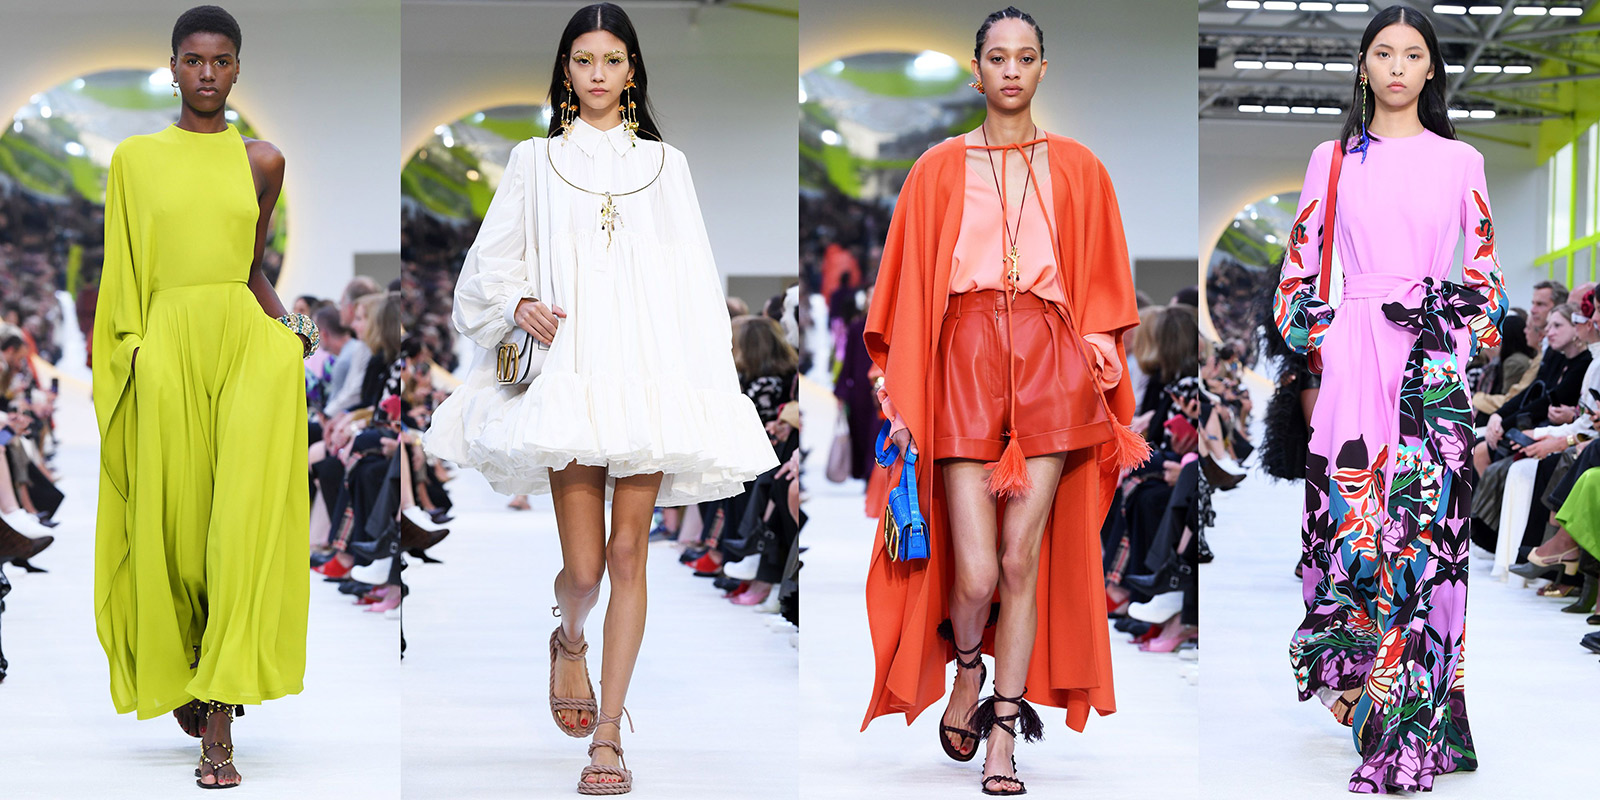 9 top trends that ruled the spring 2020 Runways - Modeliste Magazine